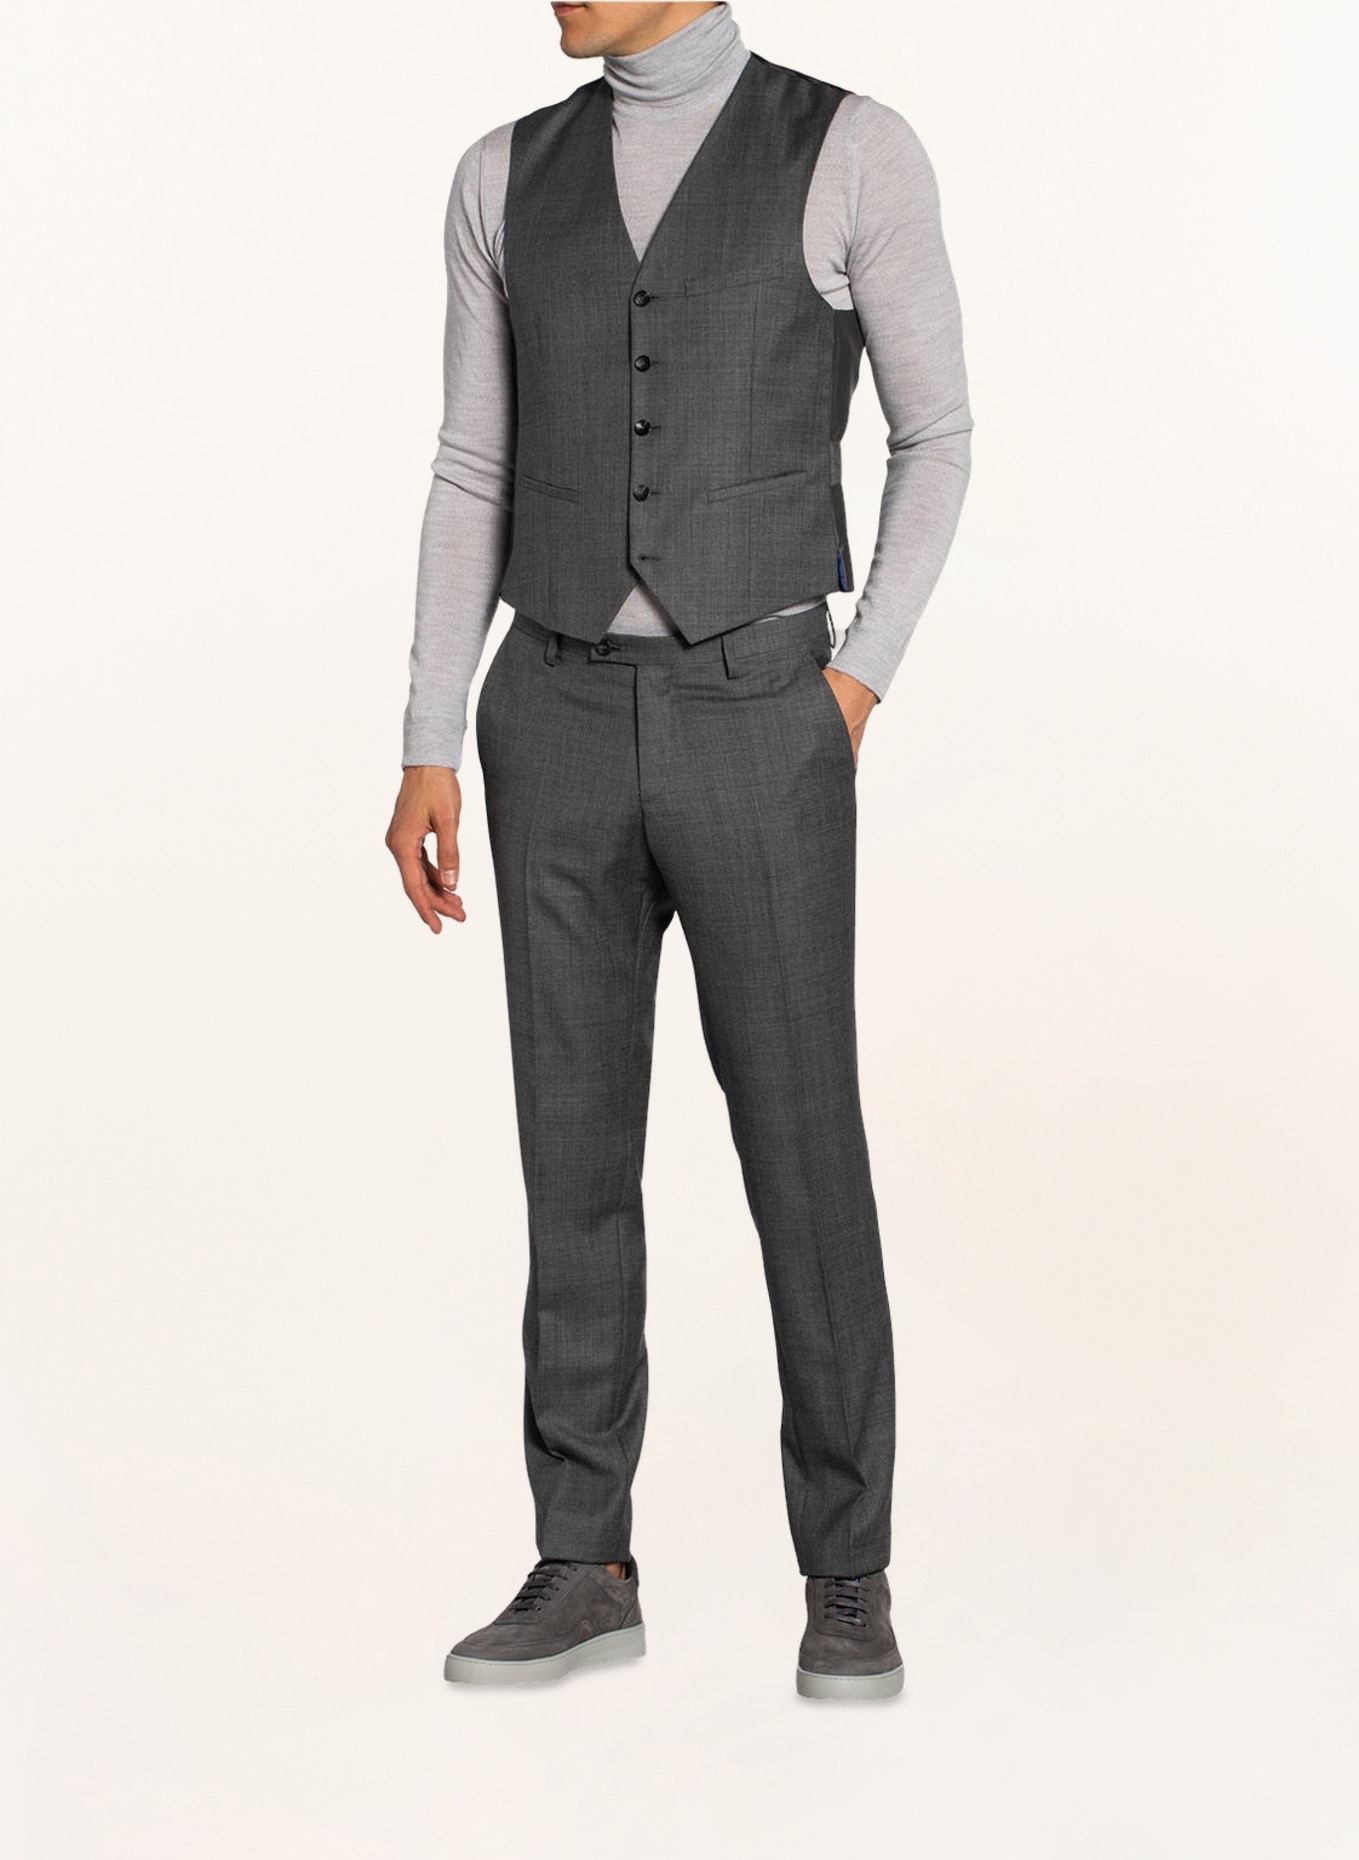 CG - CLUB of GENTS Suit trousers CHAZ regular fit, Color: 81 grau hell (Image 3)